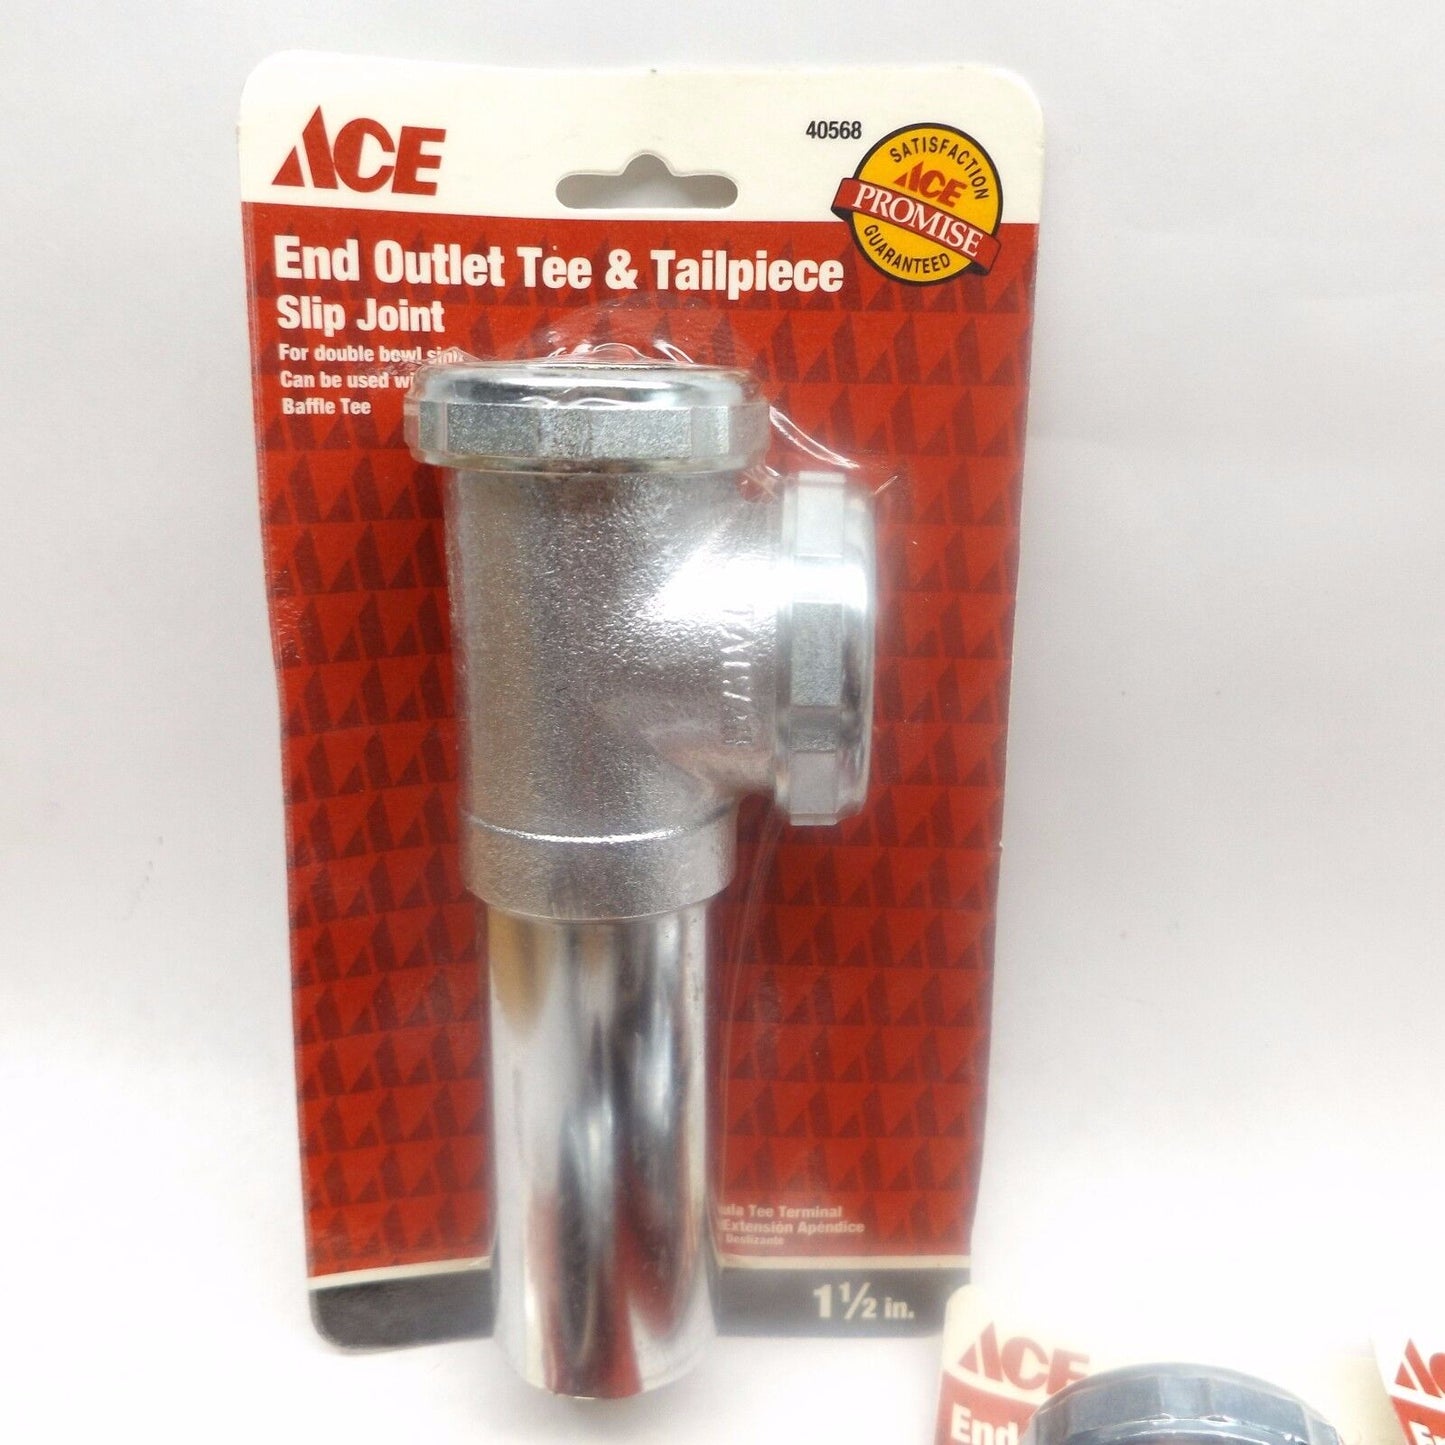 LOT OF 7 - ACE 40568 ACE128CP 1-1/2" END OUTLET TEE & TAILPIECE 22 GA, METAL